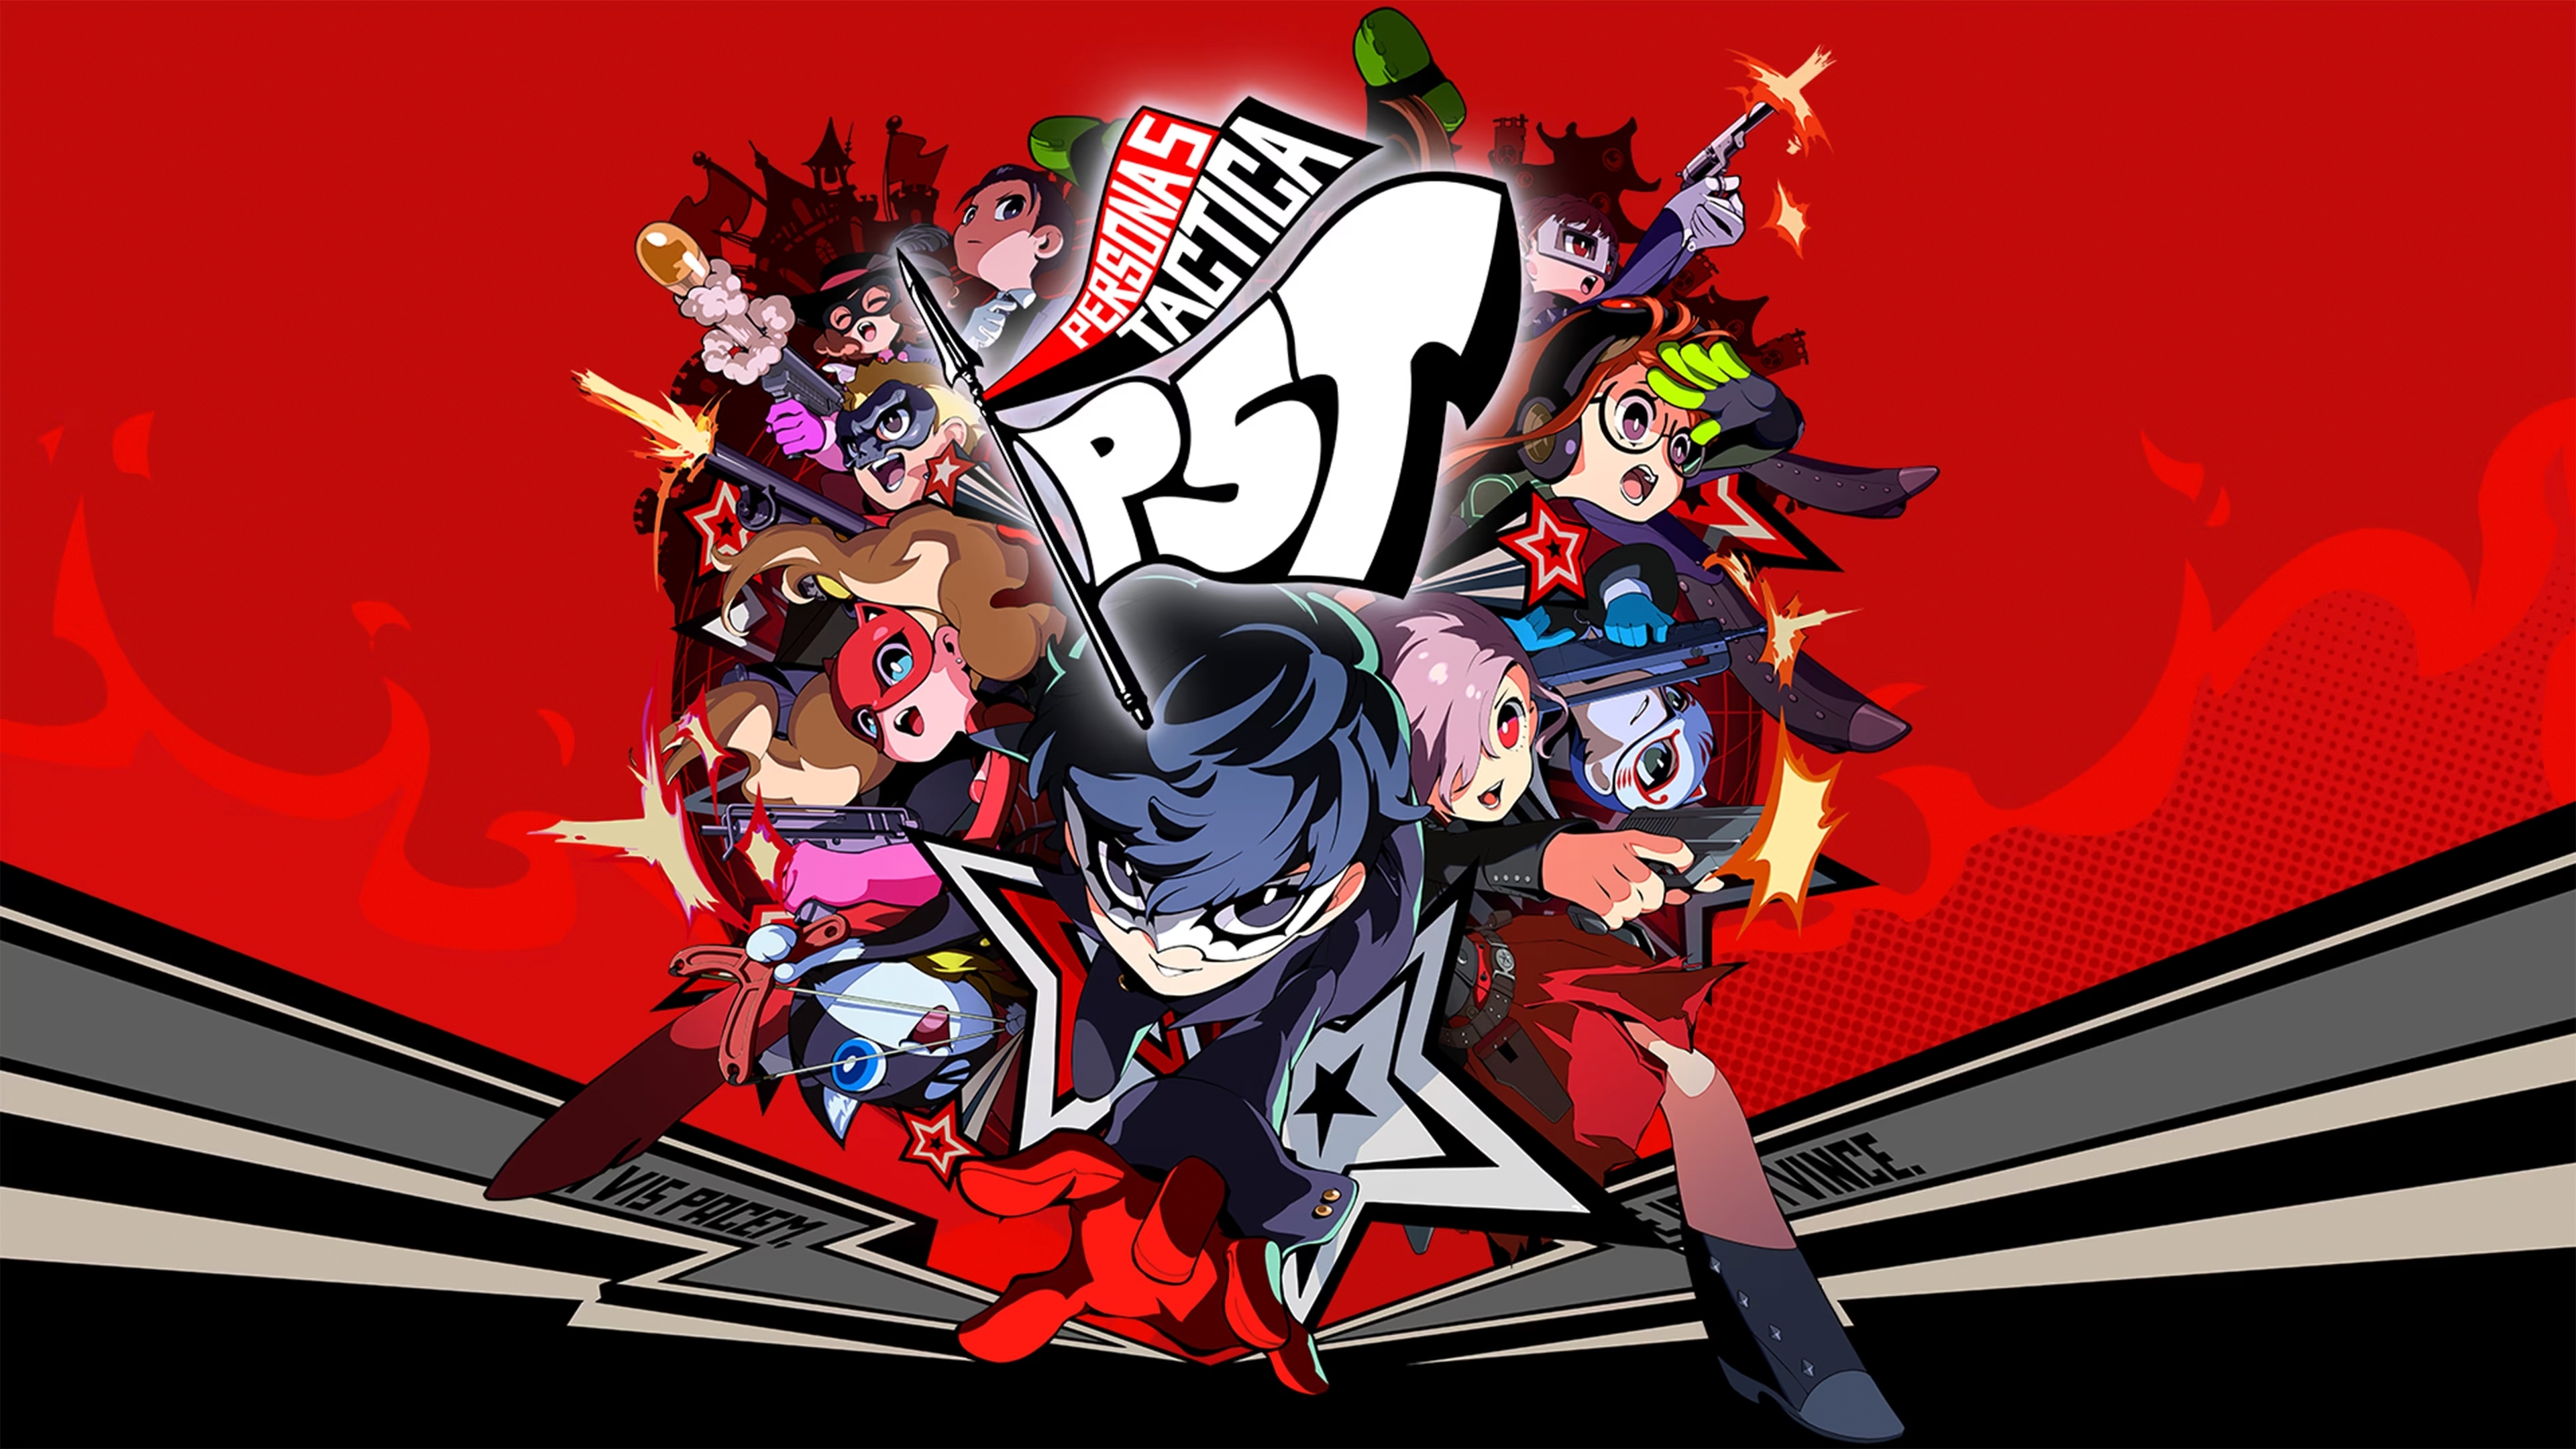 Persona 5 Royal is getting a co-operative card game next year